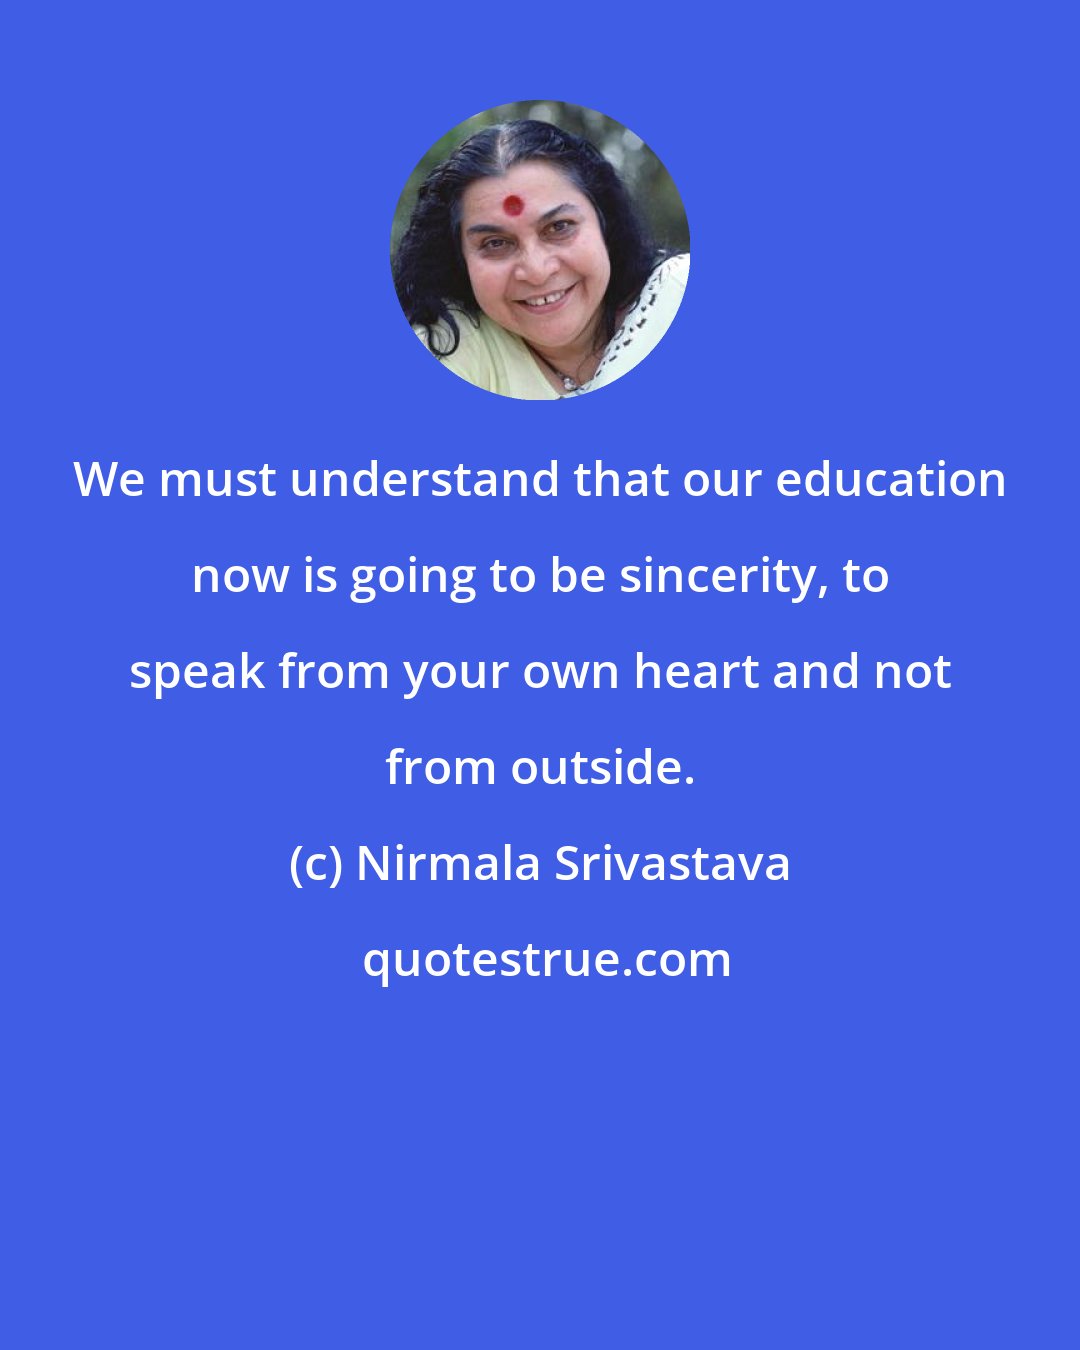 Nirmala Srivastava: We must understand that our education now is going to be sincerity, to speak from your own heart and not from outside.